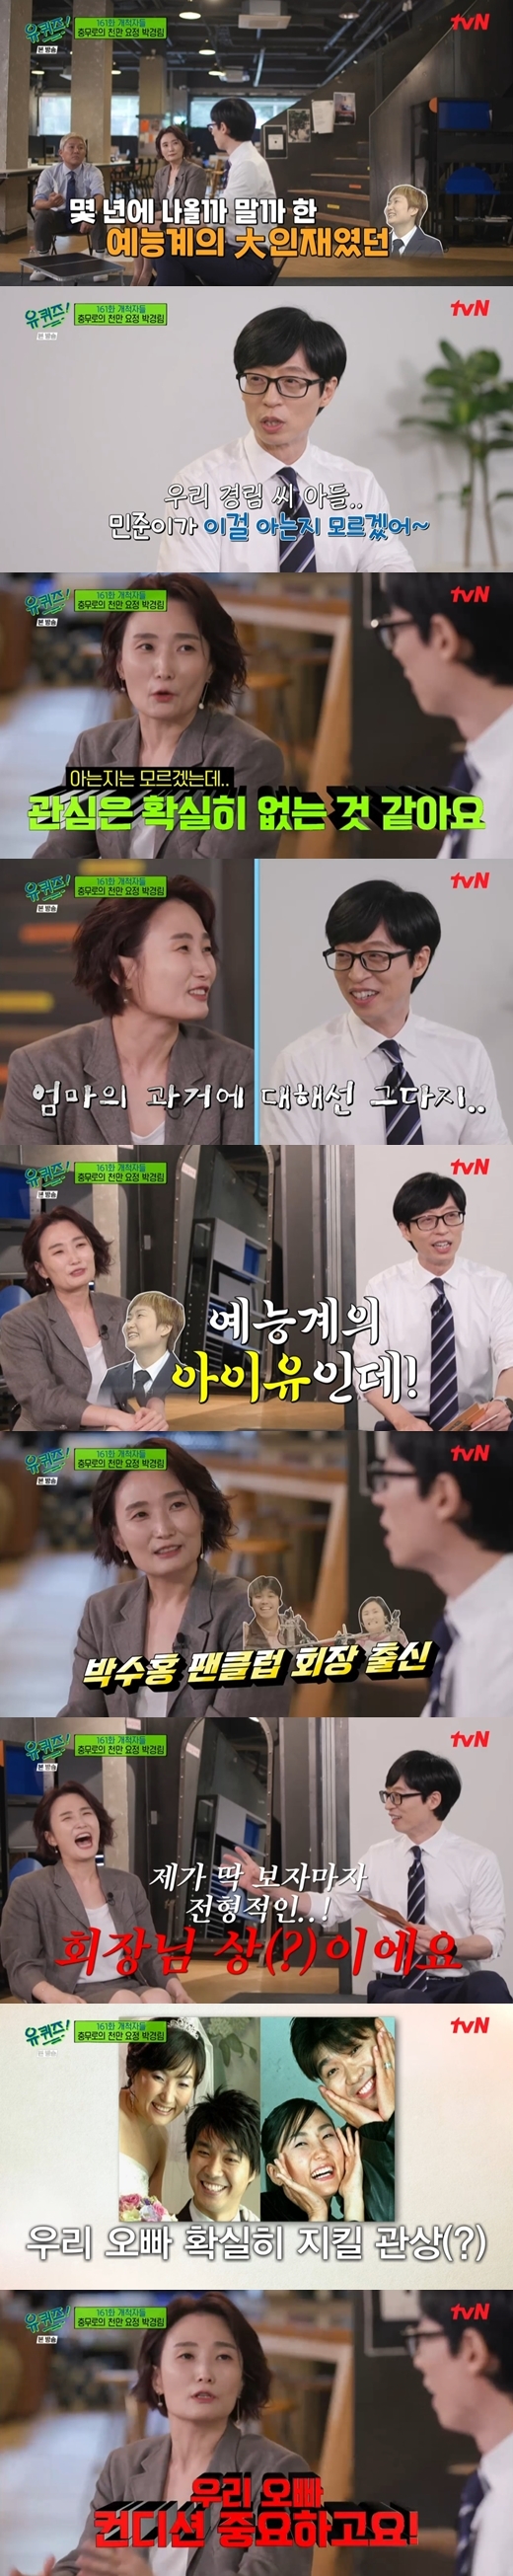 Broadcaster Park Kyung-lim recalled the past.On the 13th TVN You Quiz on the Block 161 Predators featured Noh Young-sun, an emergency medicine specialist, MC Park Kyung-lim, Physicist Kim Sang-wook, and Falcons Bae Chul-soo and Koo Chang-mo as Yuquisor.On the day, Yoo Jae-Suk said, Park Kyung-lim was really a talent in the arts industry, whether it would come out once a few years.But now, my son Minjun does not know that his mothers past is like that. Park Kyung-lim said, I do not know if I know, but I do not think Im interested. Yoo Jae-Suk then said, One of the famous pasts of Park Kyung-lim is from the Pan club president of Park Soo-hong, and Park Kyung-lim said, I am a virtue.I always thought my brothers condition was important, and I thought that I should not die. 